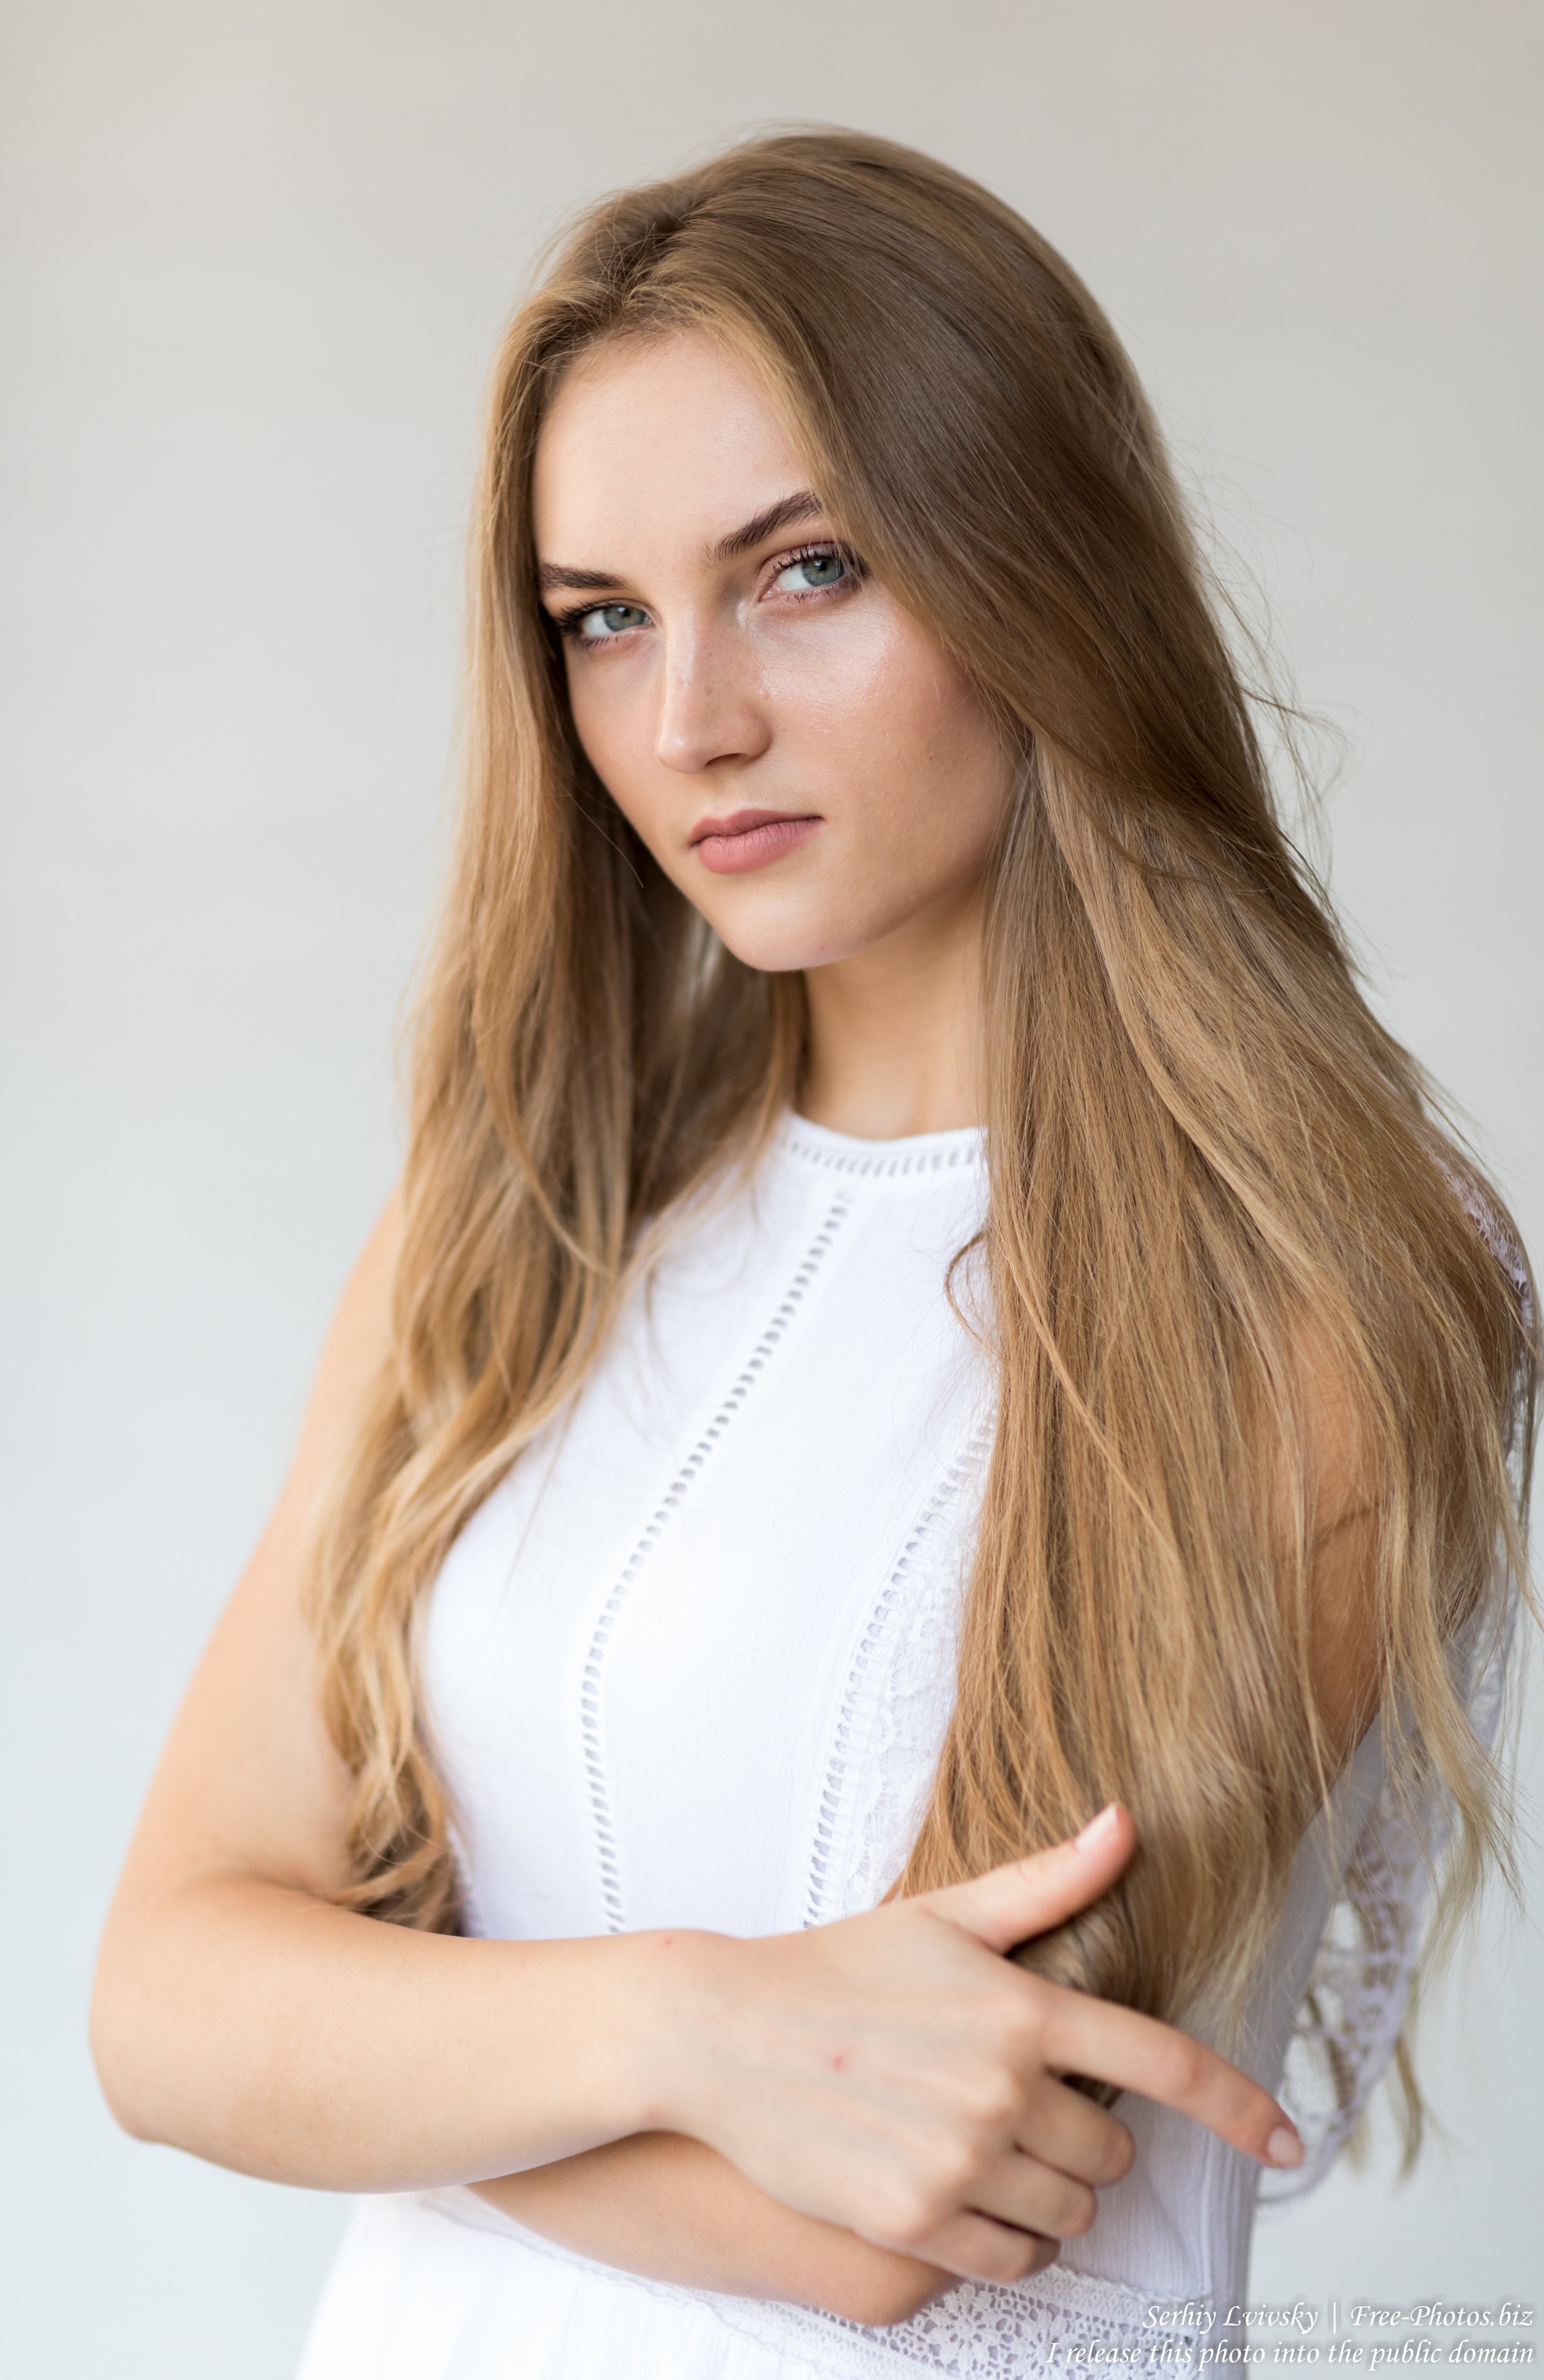 Yaryna - a 21-year-old natural blonde Catholic girl photographed in August 2019 by Serhiy Lvivsky, picture 10